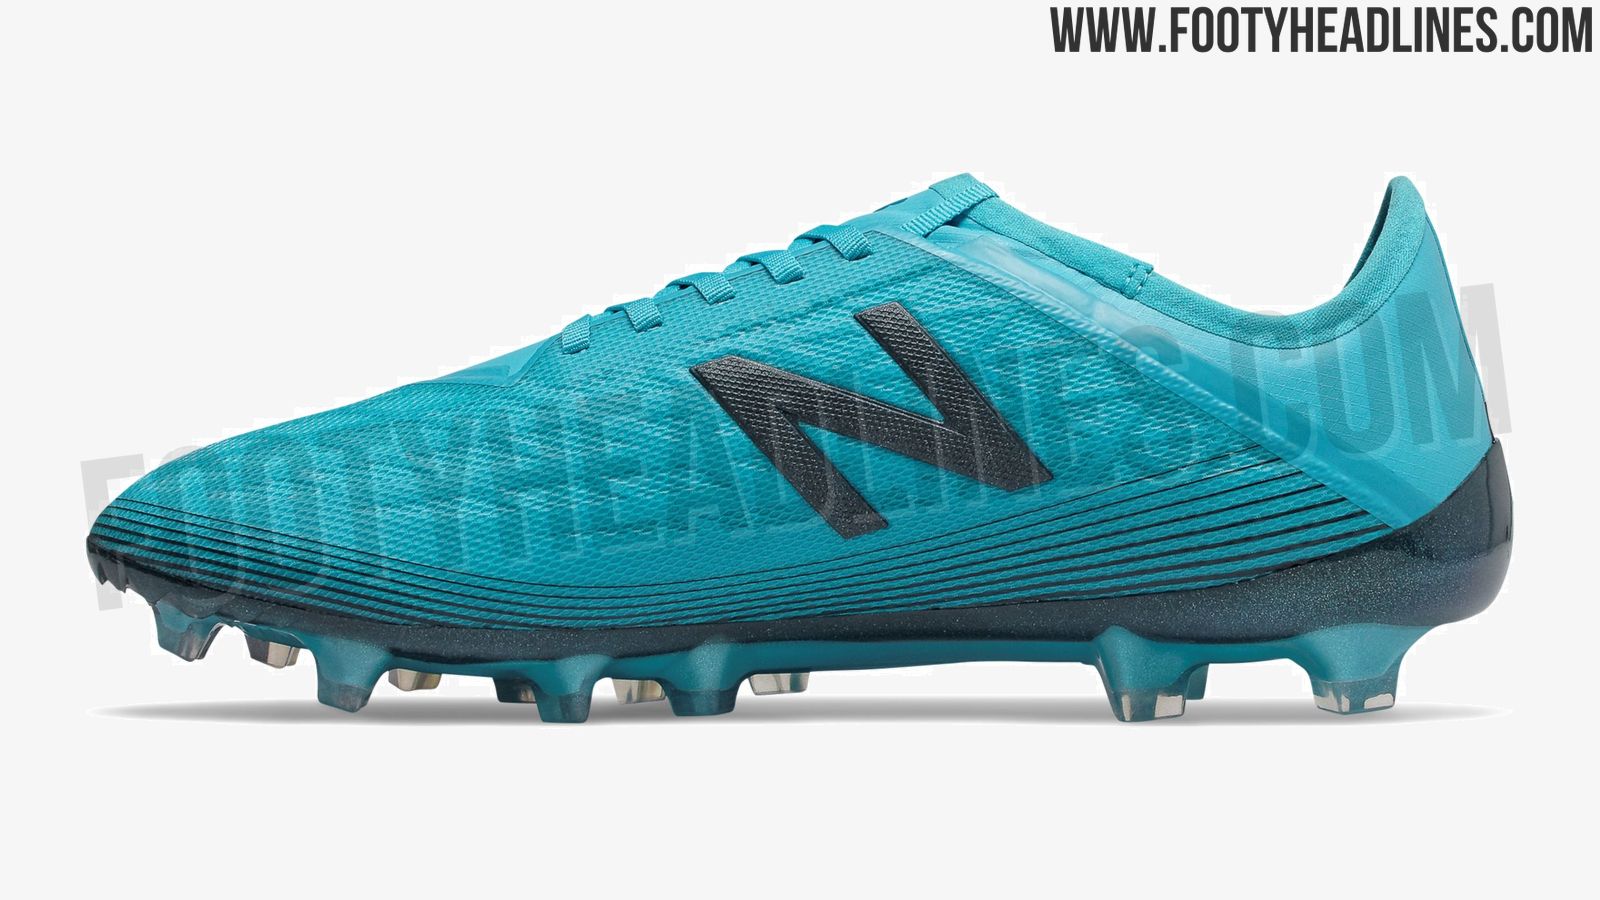 New Boots For Liverpool's Mané - Teal New Balance Furon 5.0 Boots ...